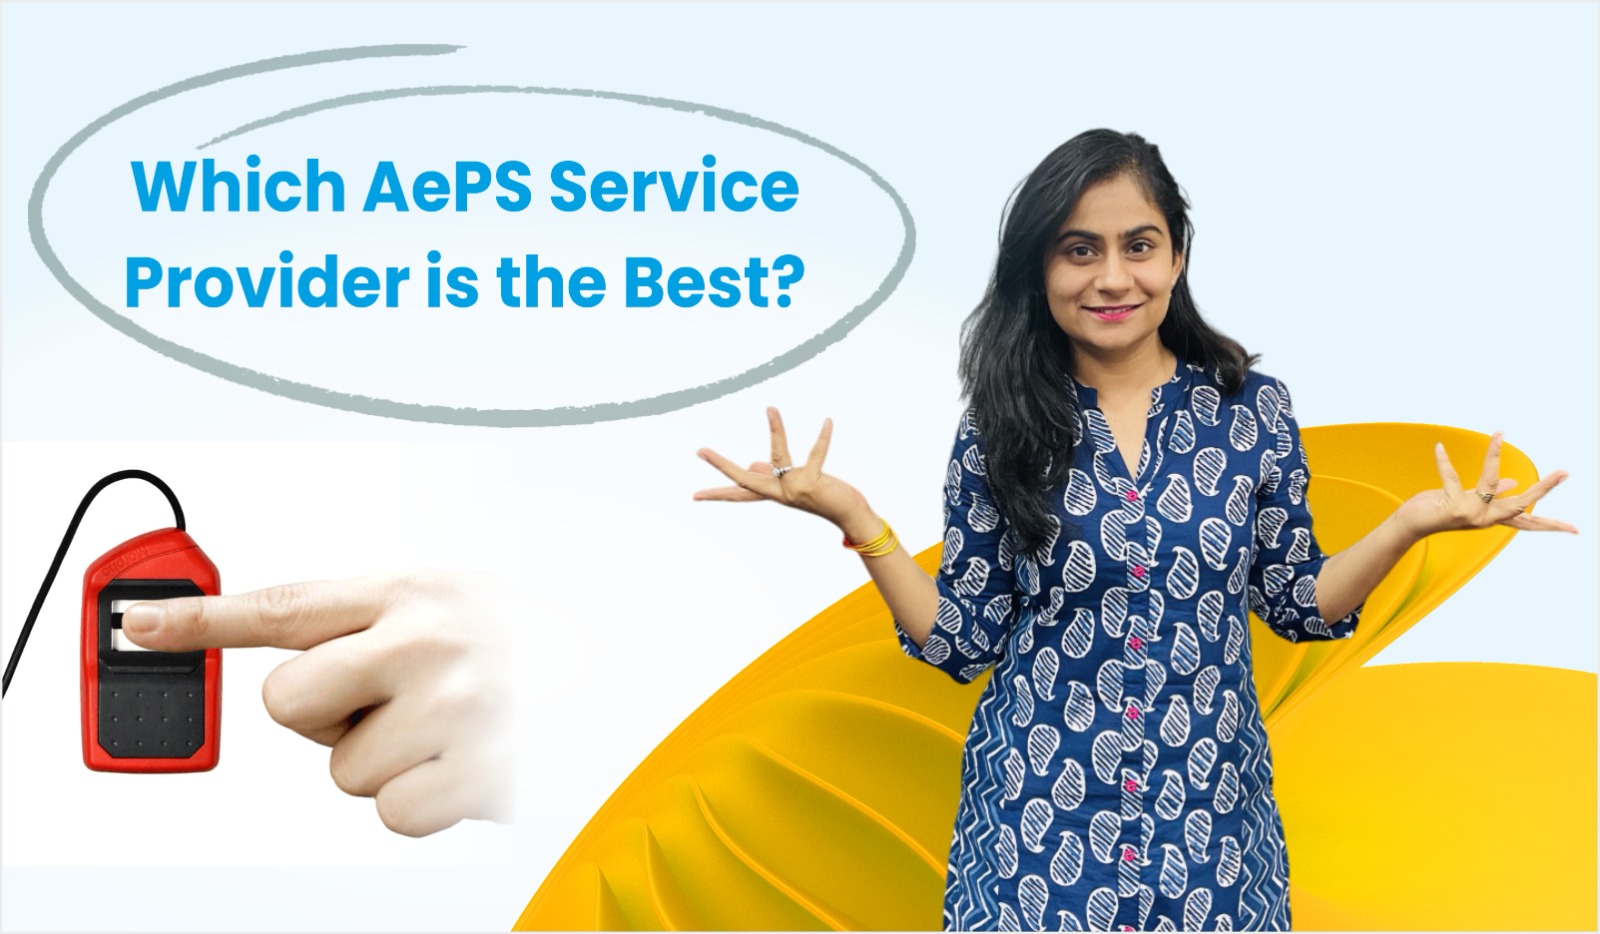 which aeps service is best?